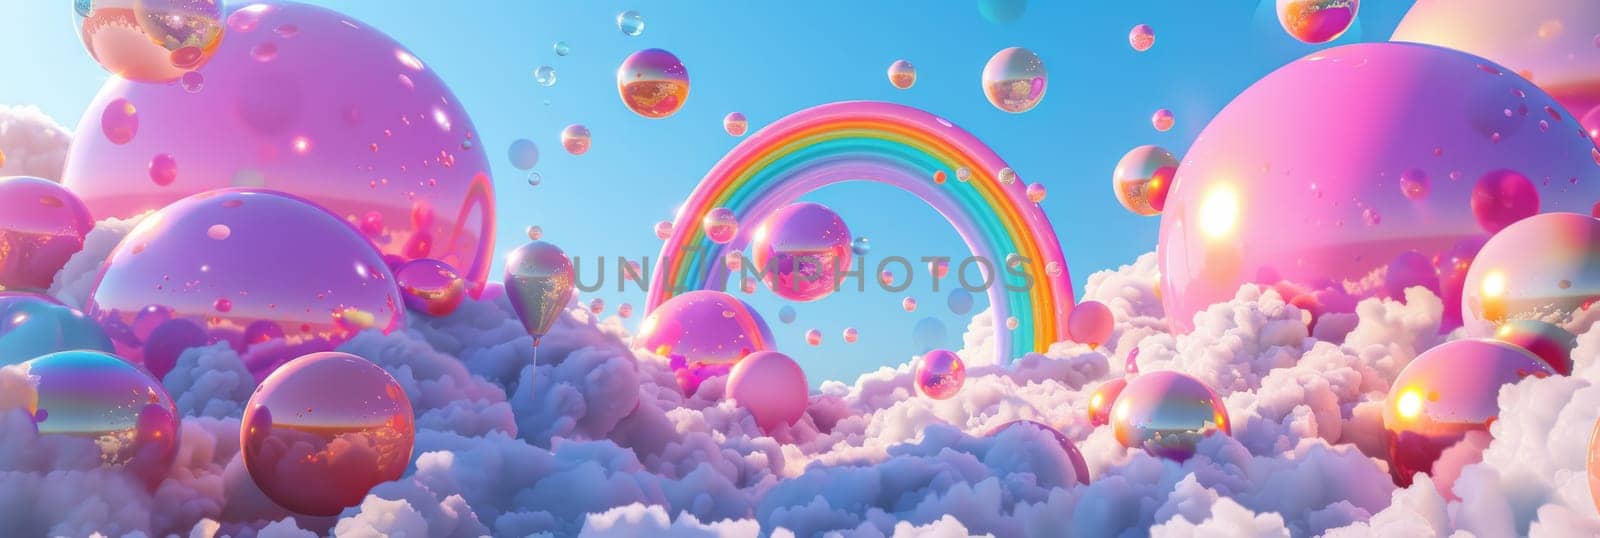 A colorful rainbow archway with balloons and a blue sky background by AI generated image.